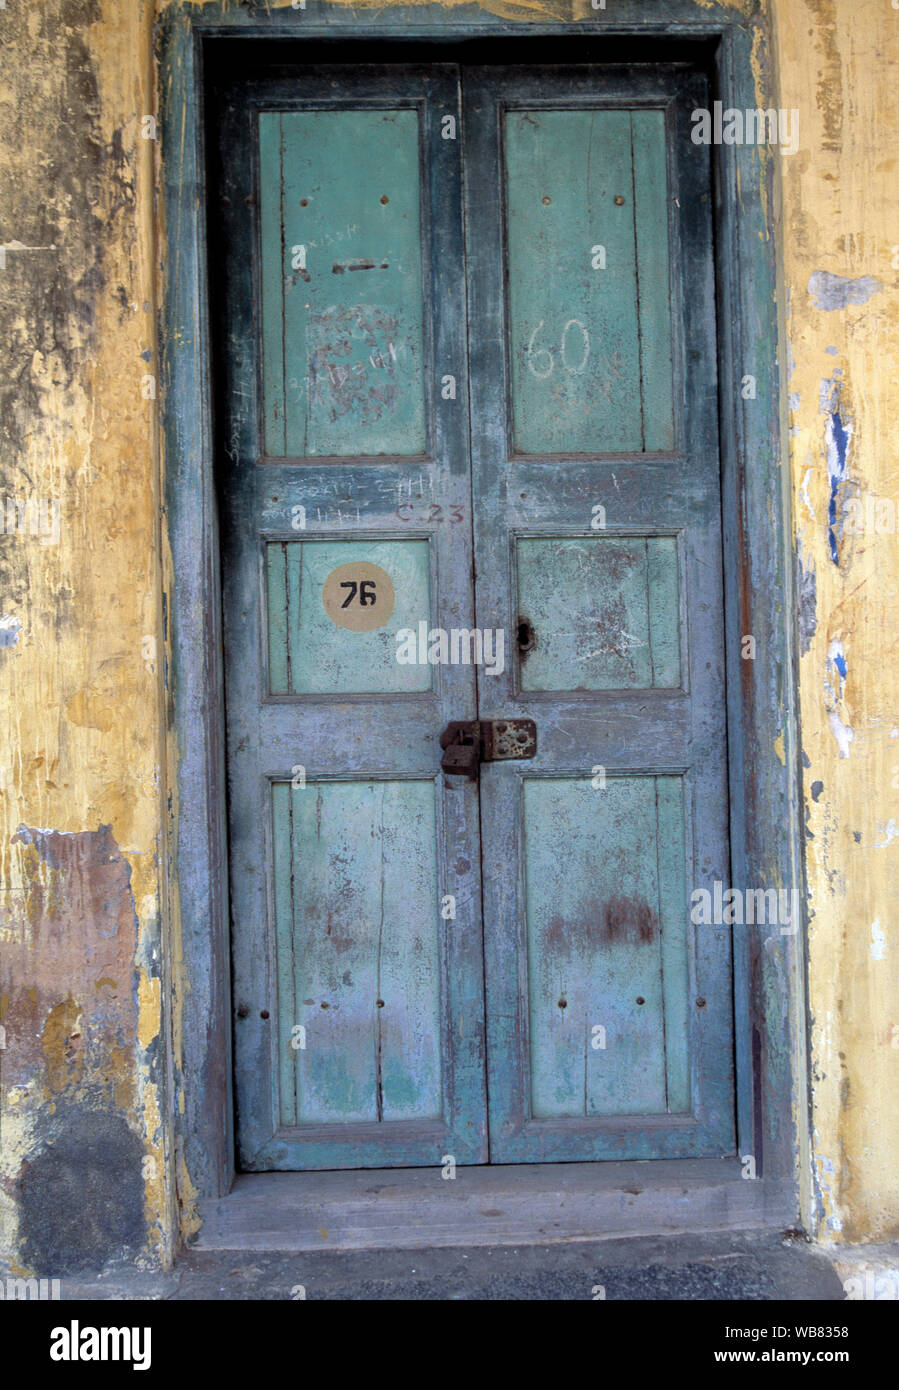 europe, canary islands, old wooden door entrance to a derelict house Stock Photo